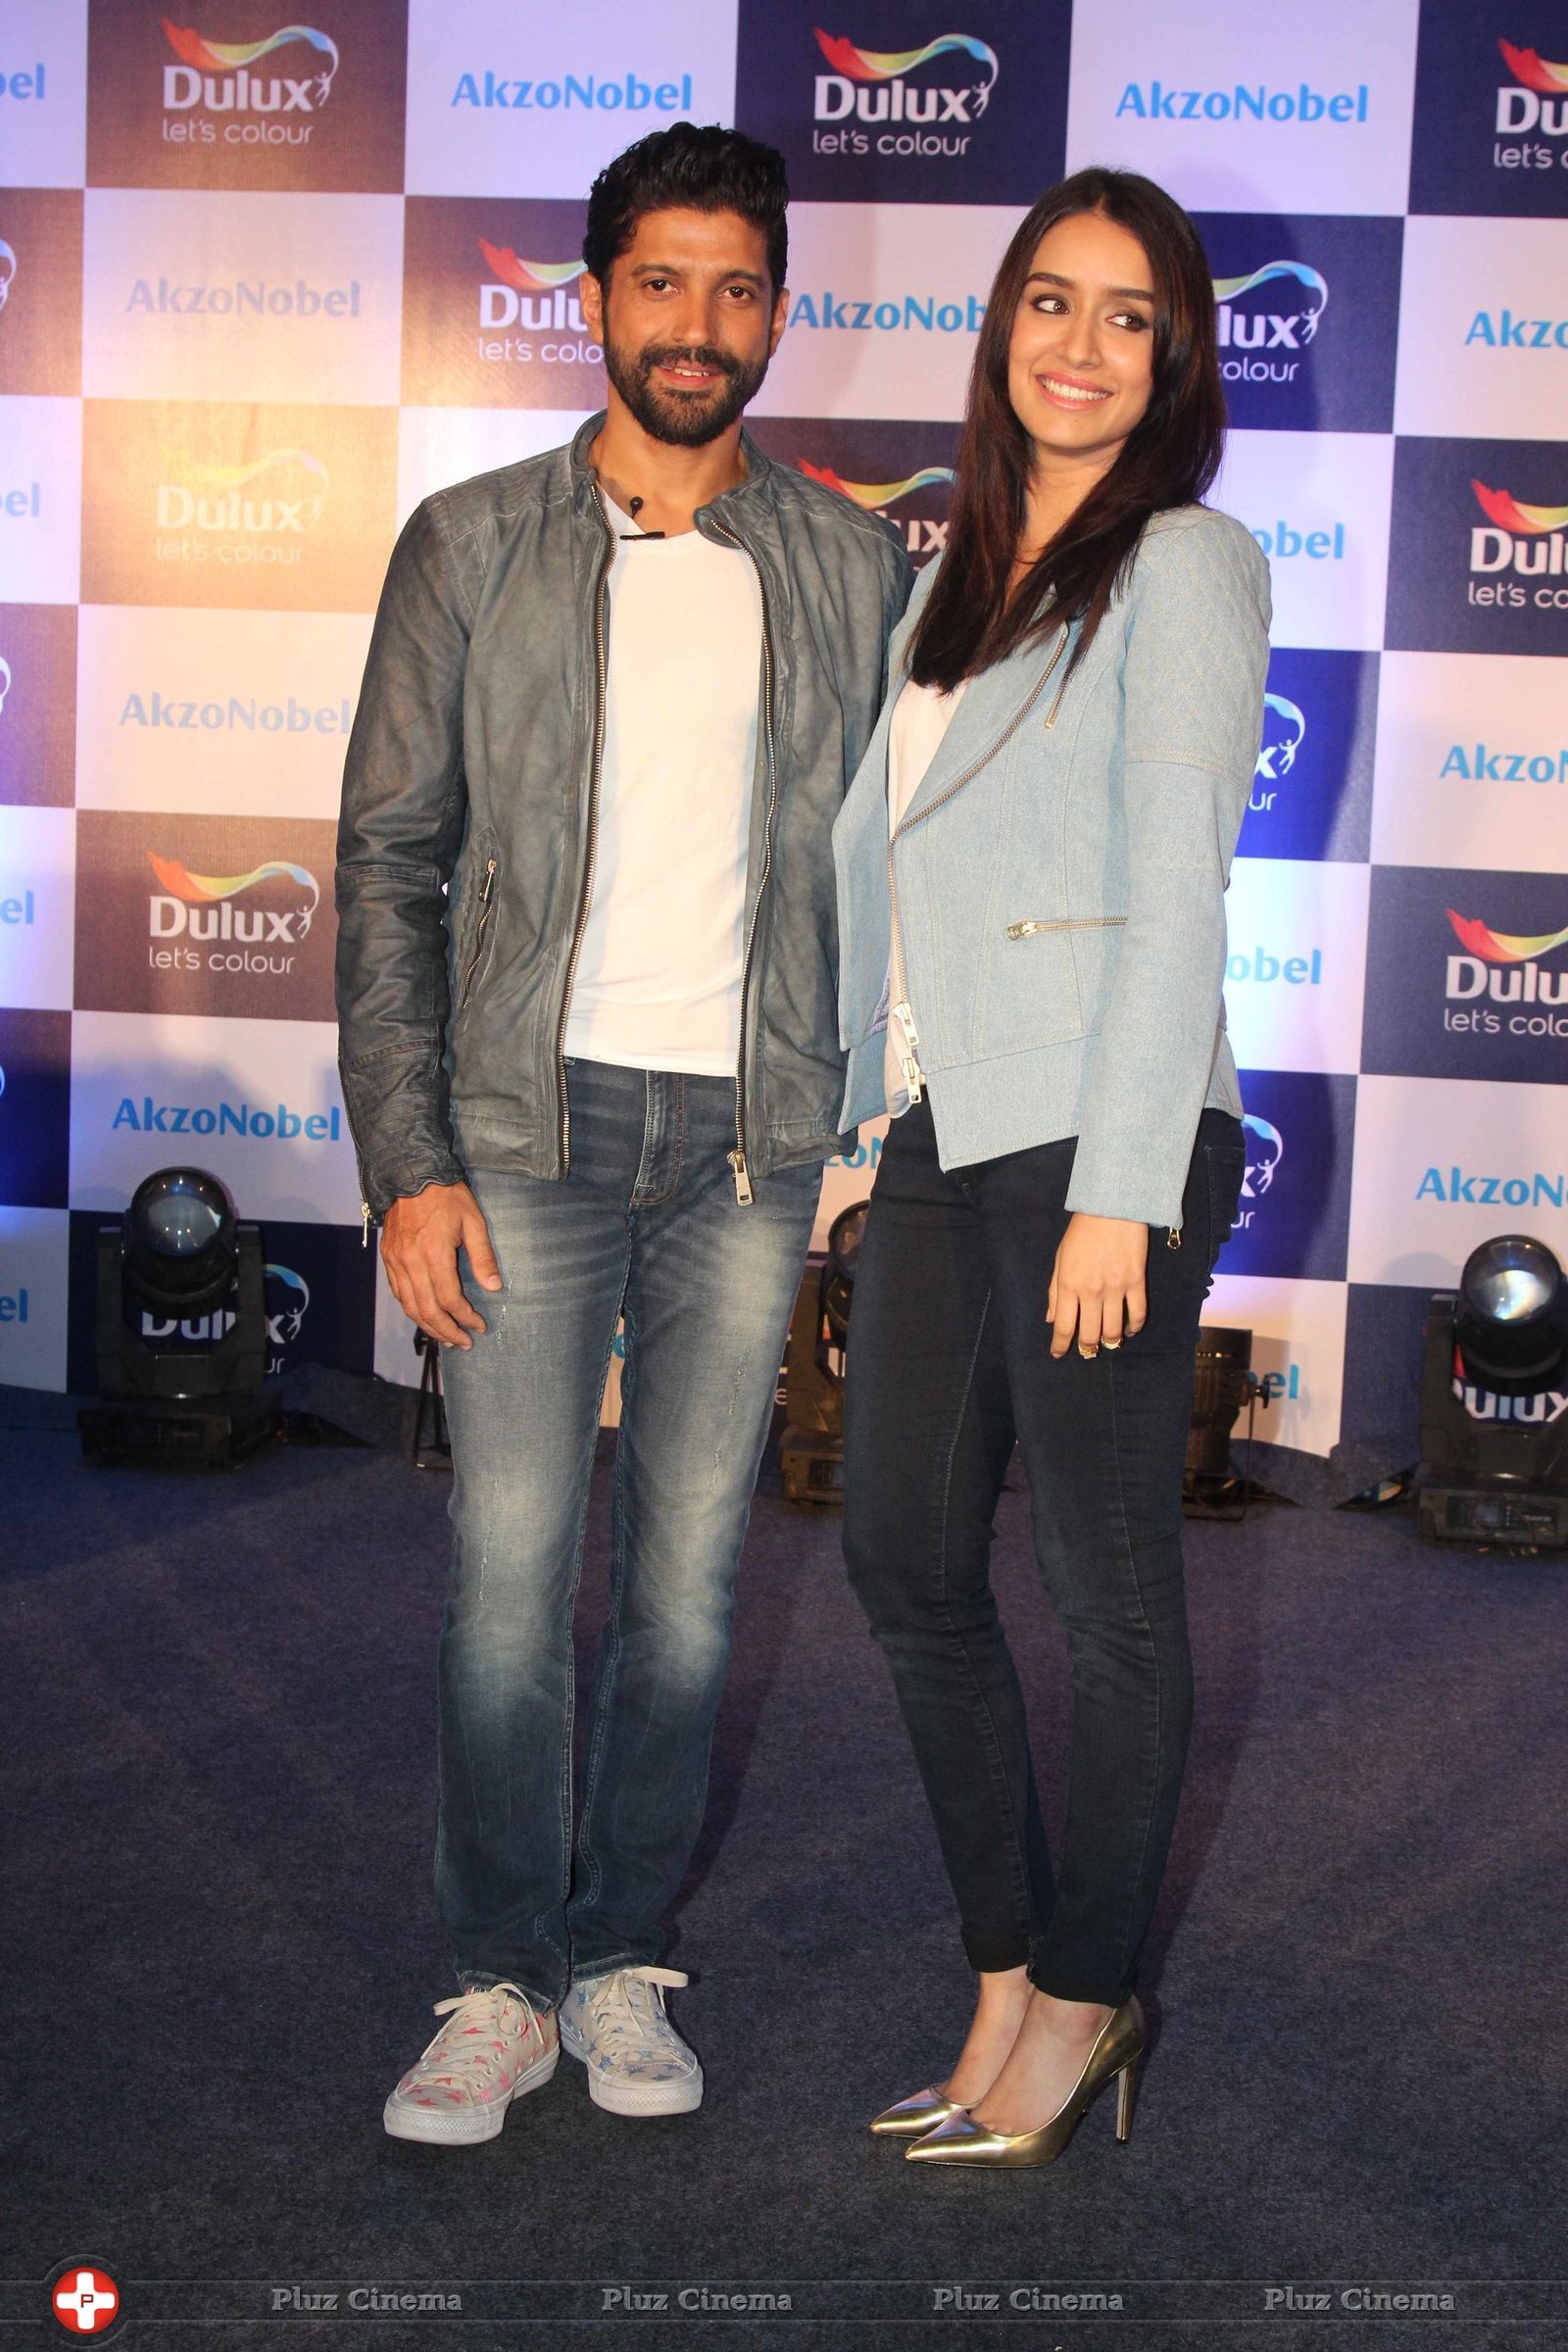 Farhan Akhtar and Shraddha Kapoor at the launch of Dulux new Color Range Photos | Picture 1445956